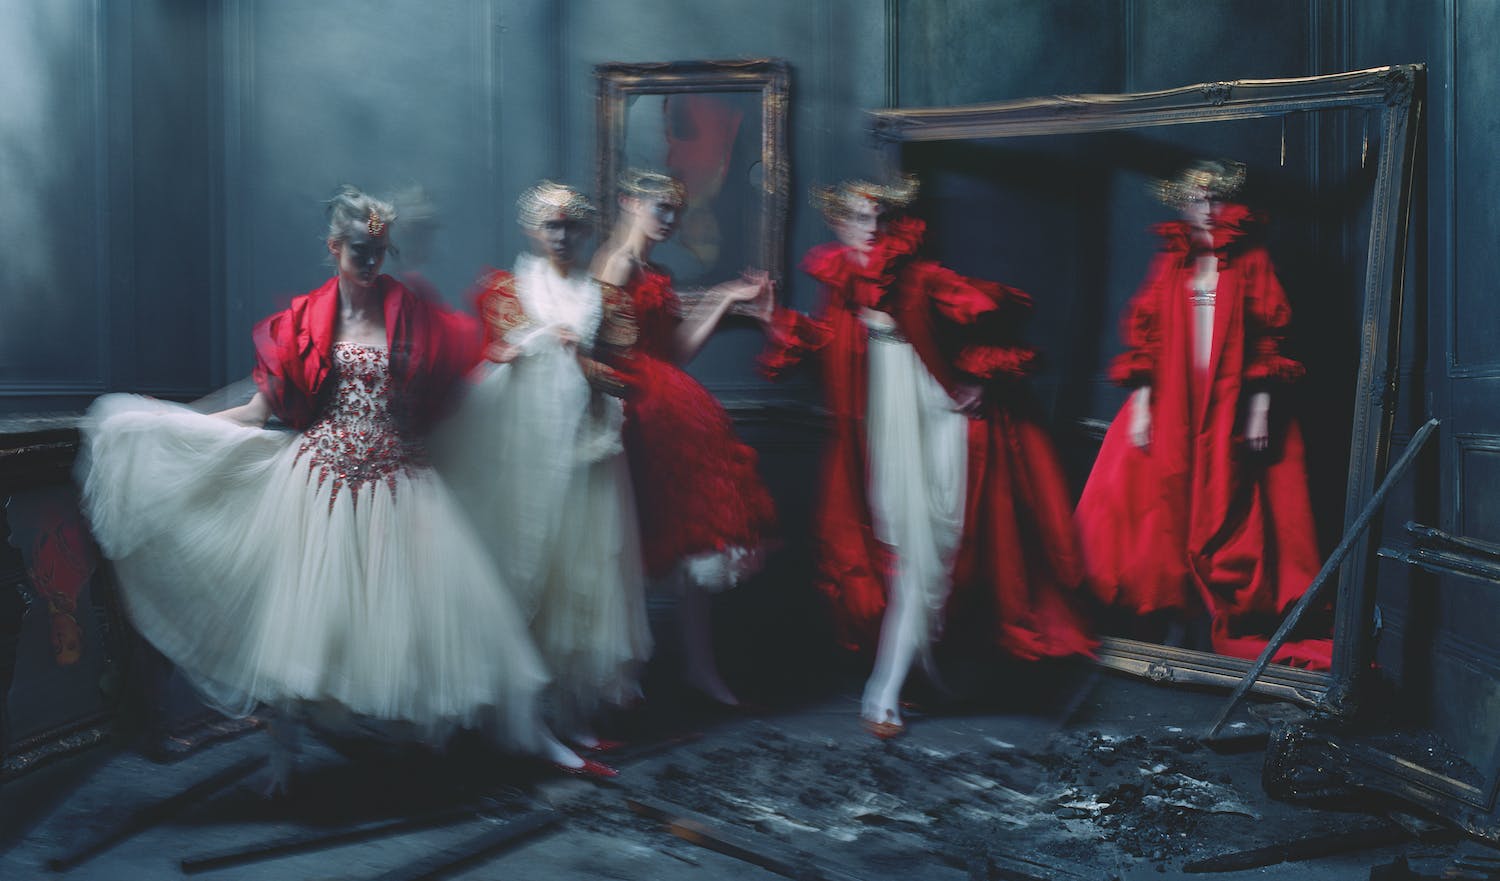 Tim Walker - one of the world's leading fashion photographers